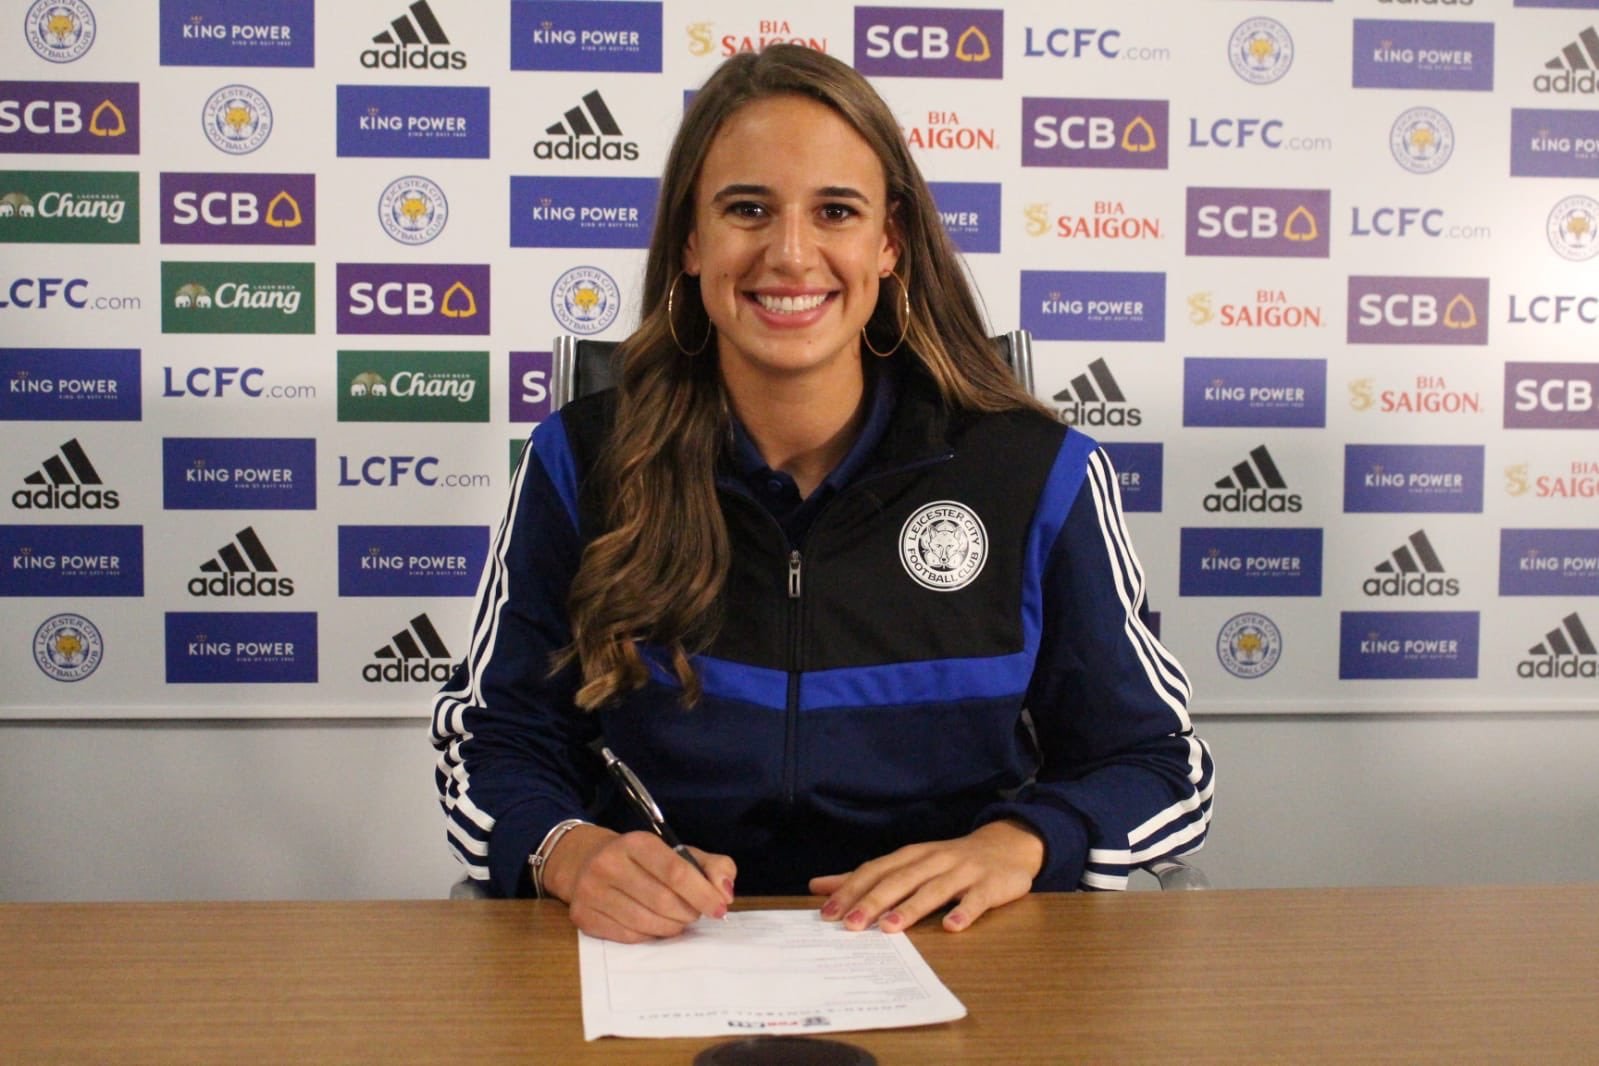 Leicester City's new signing, Ashleigh Plumptre